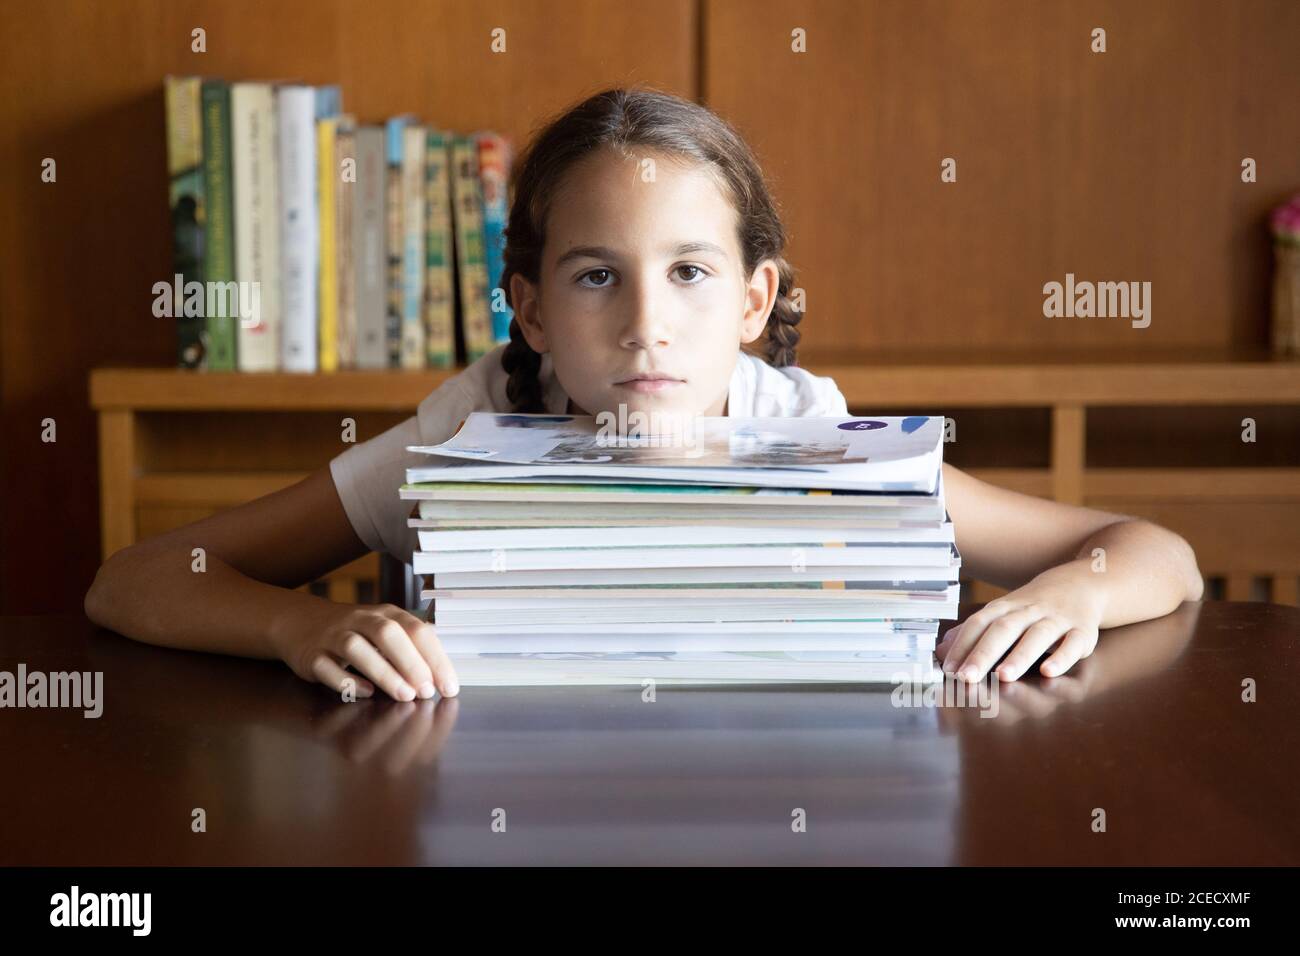 Young student tired of studying looking towards the camera next to a pile of books Stock Photo